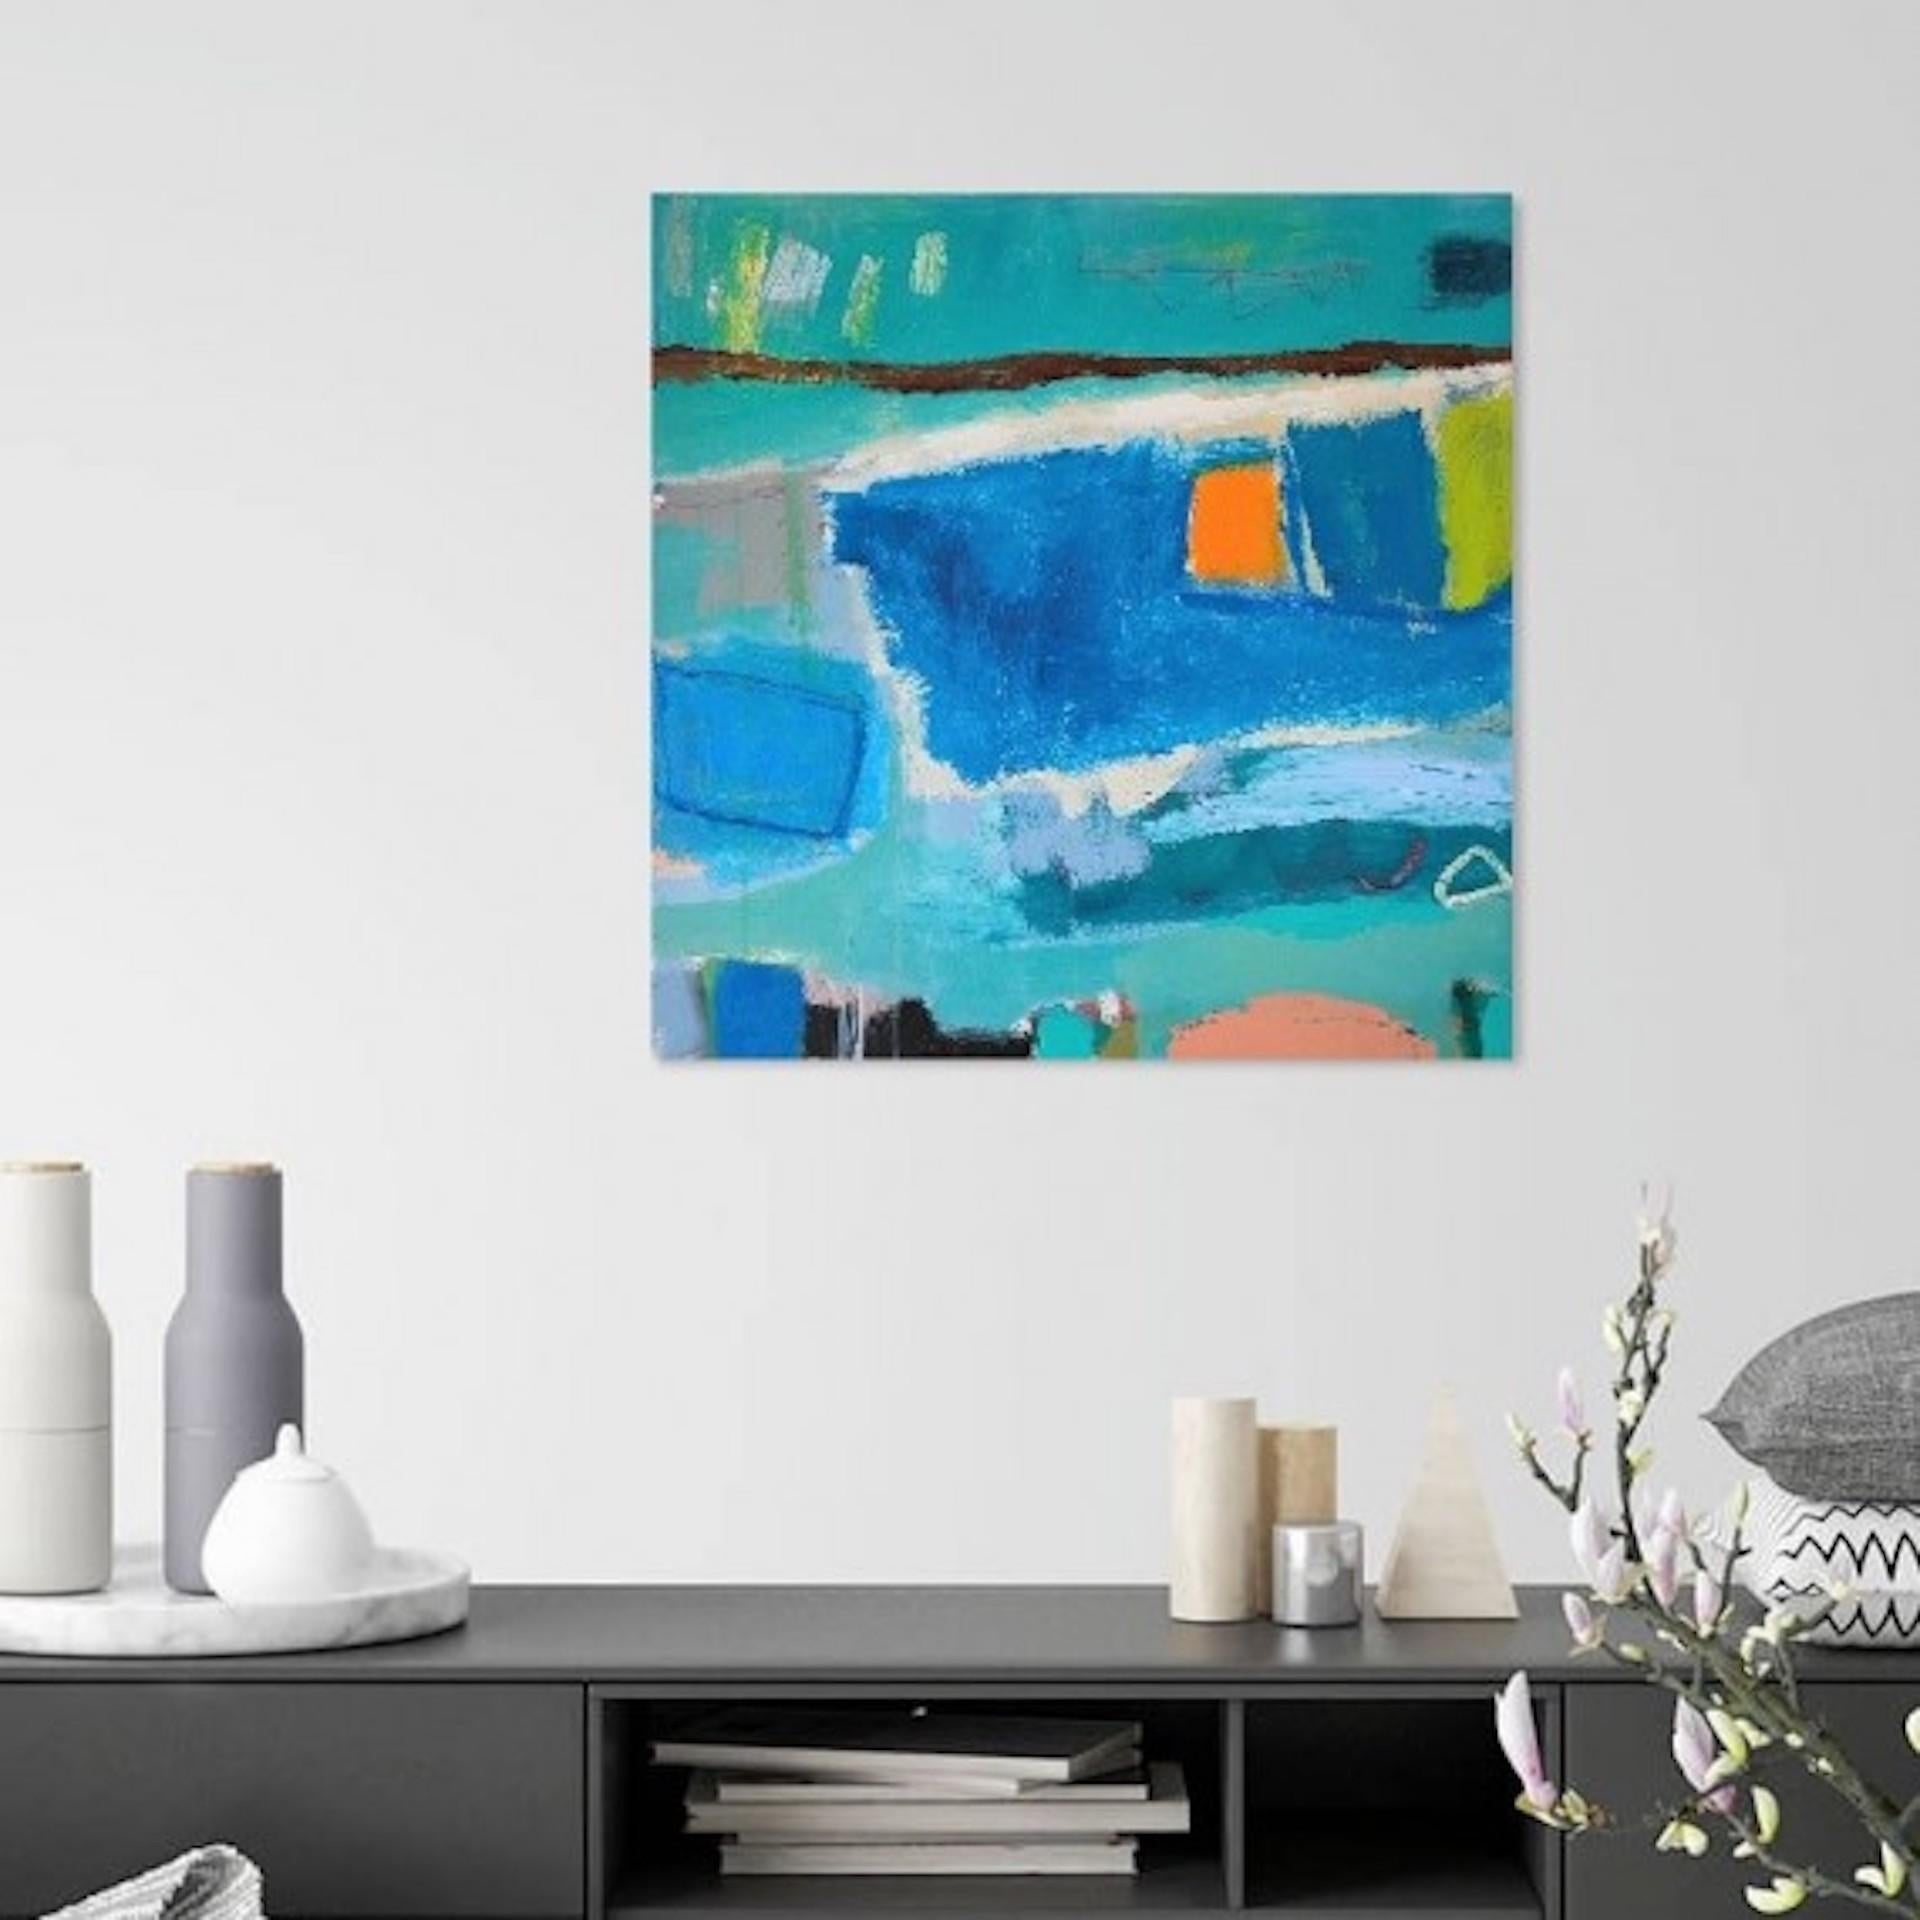 Swimming In Blue, Diane Whalley, Original Abstract Painting, Affordable Artwork 5